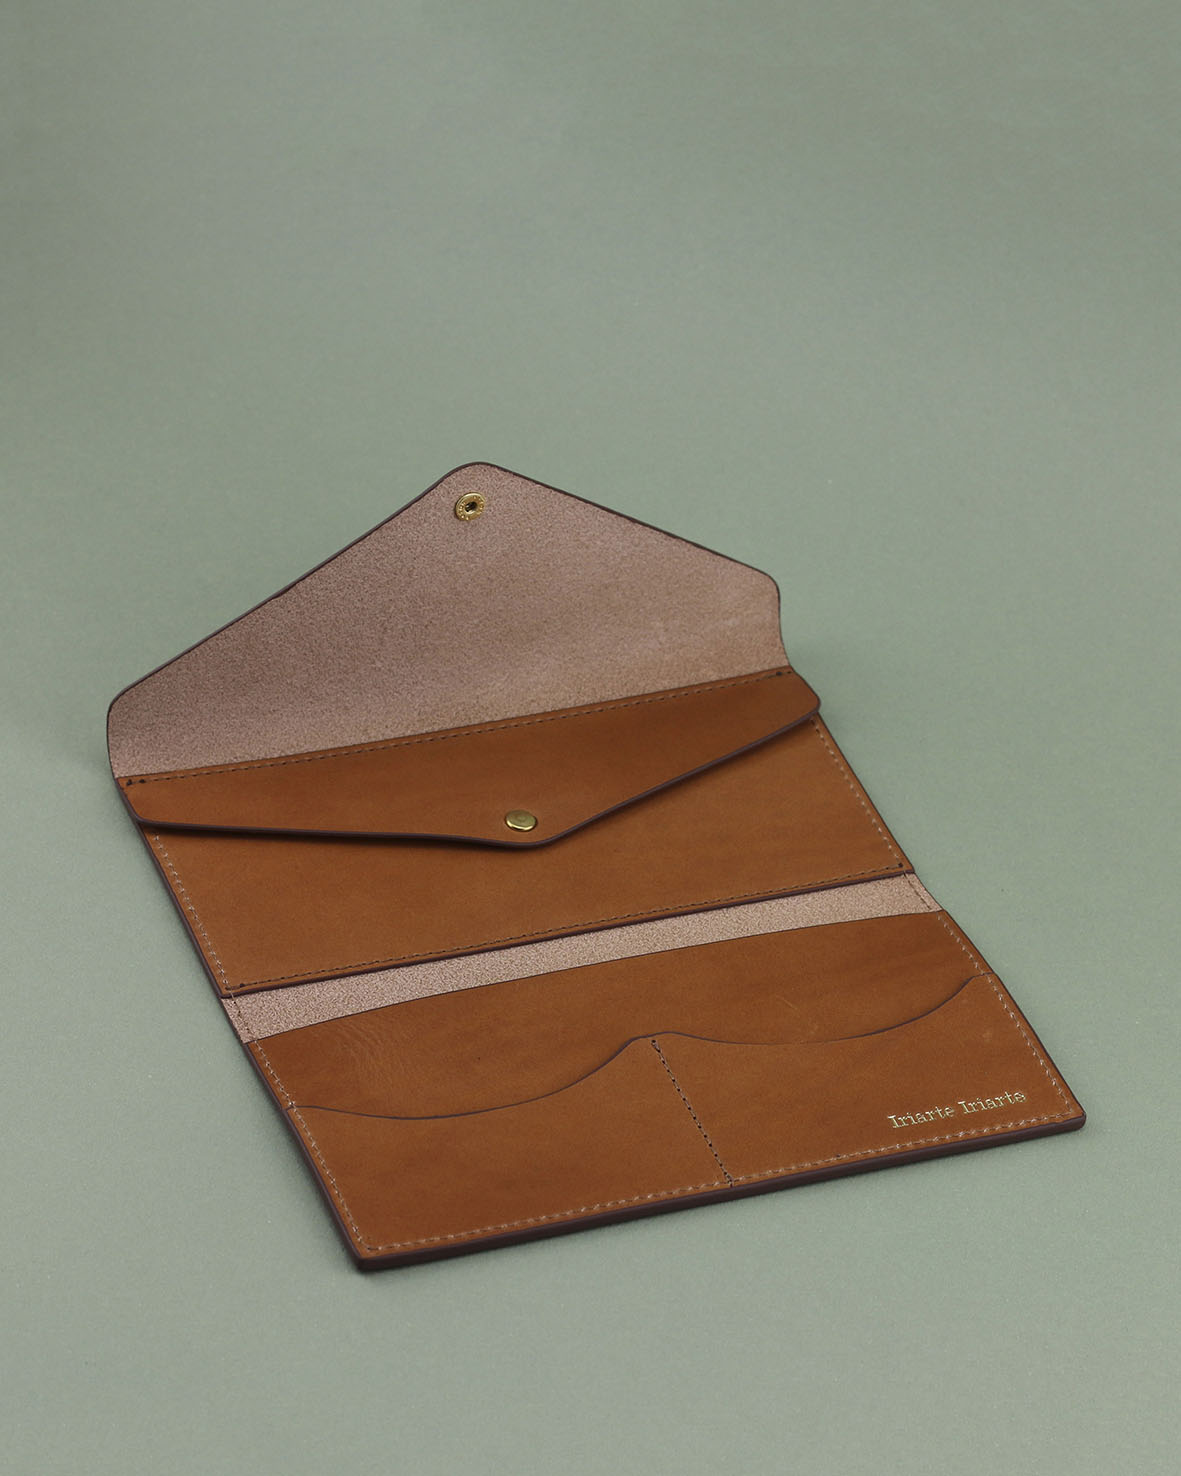 Wallet (L) - Large Wallet designed and handcrafted in Barcelona